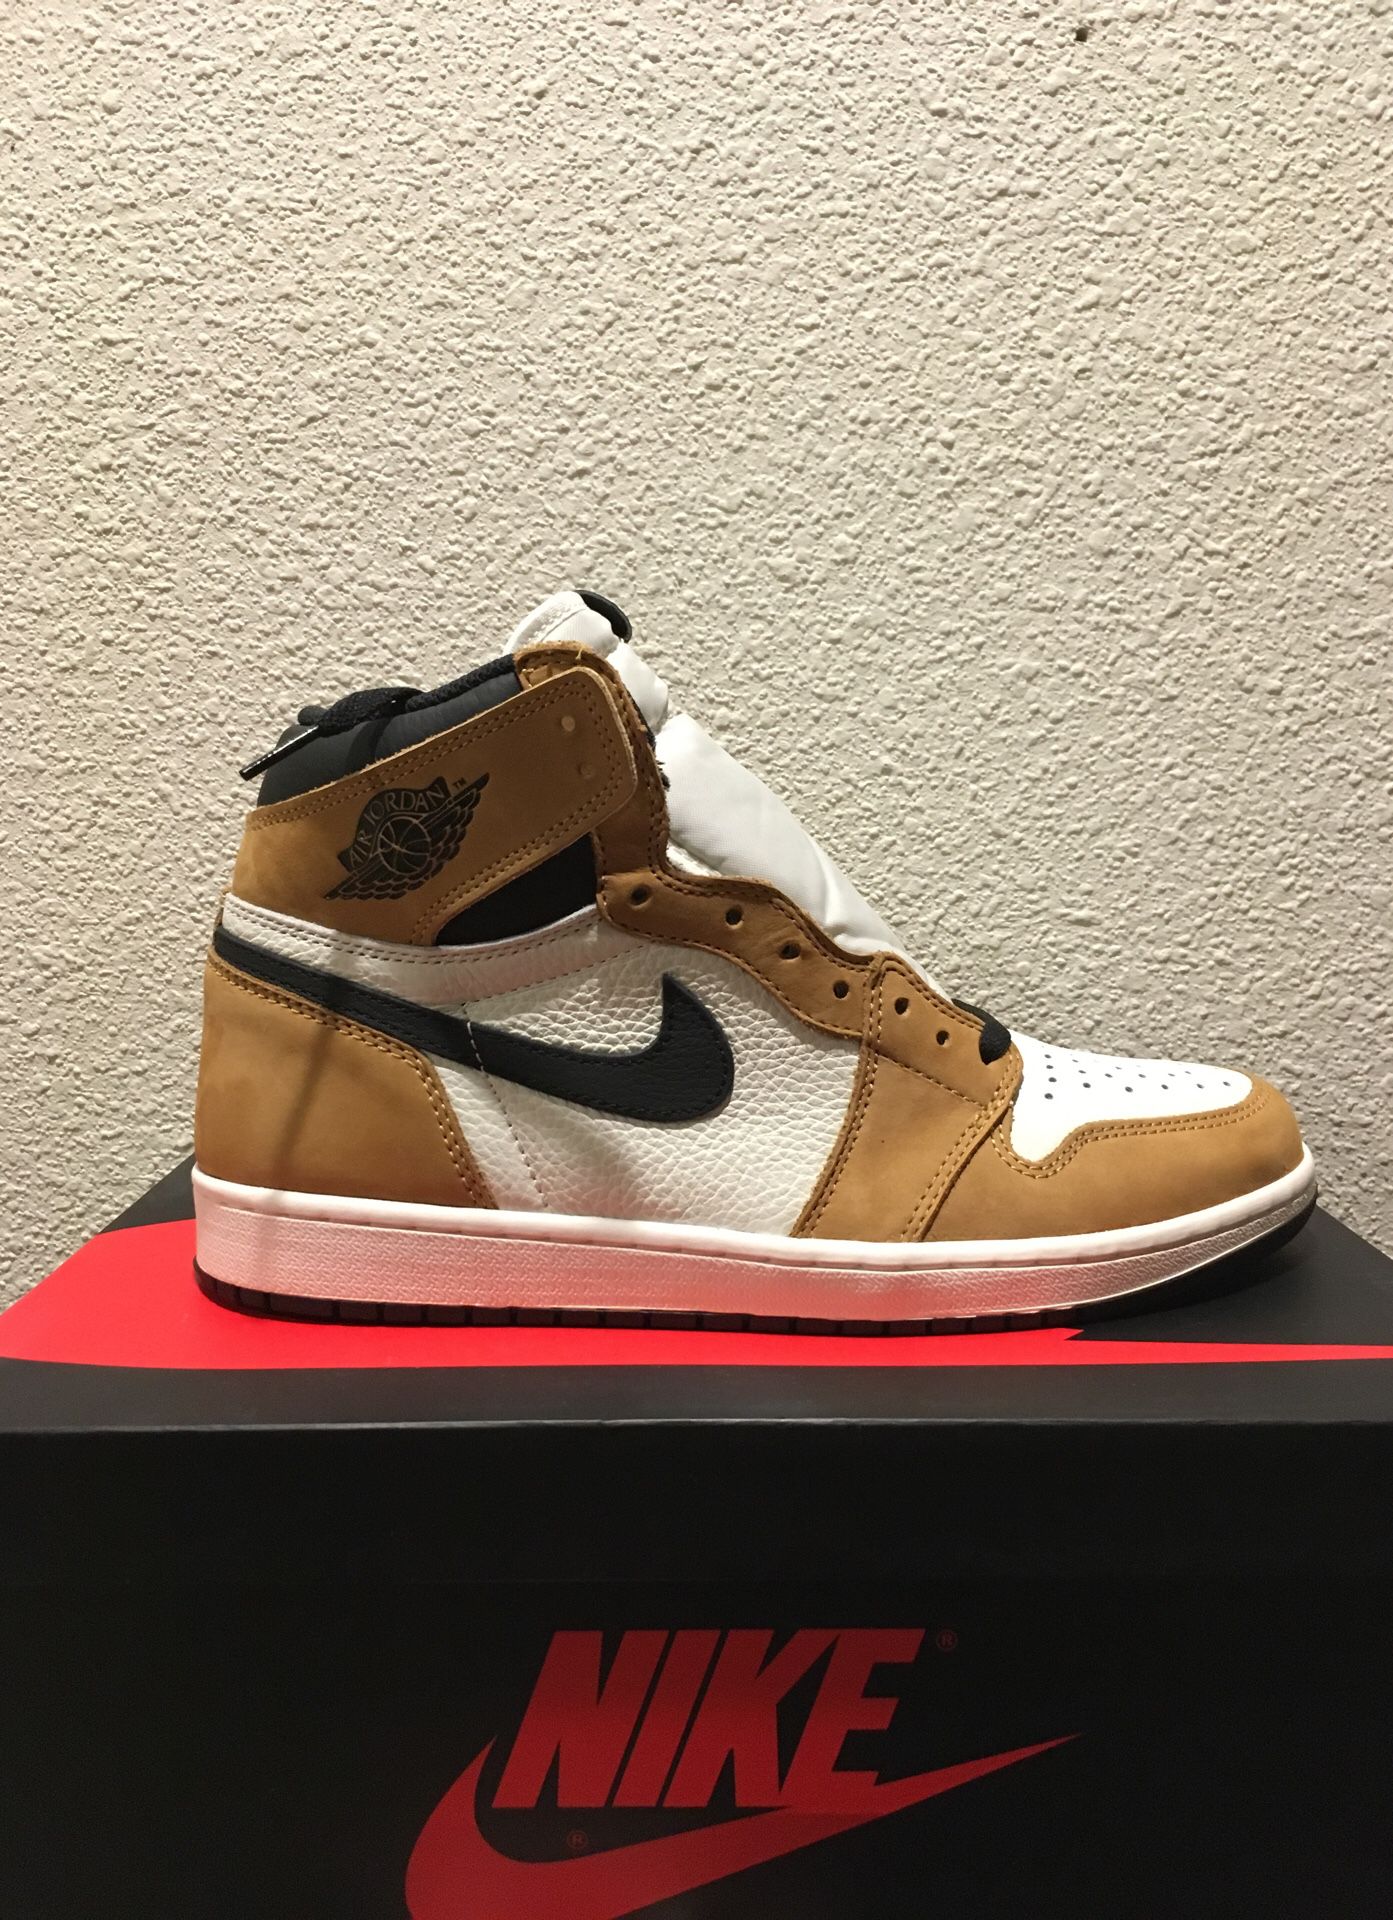 Jordan 1 Rookie of The Year size 10